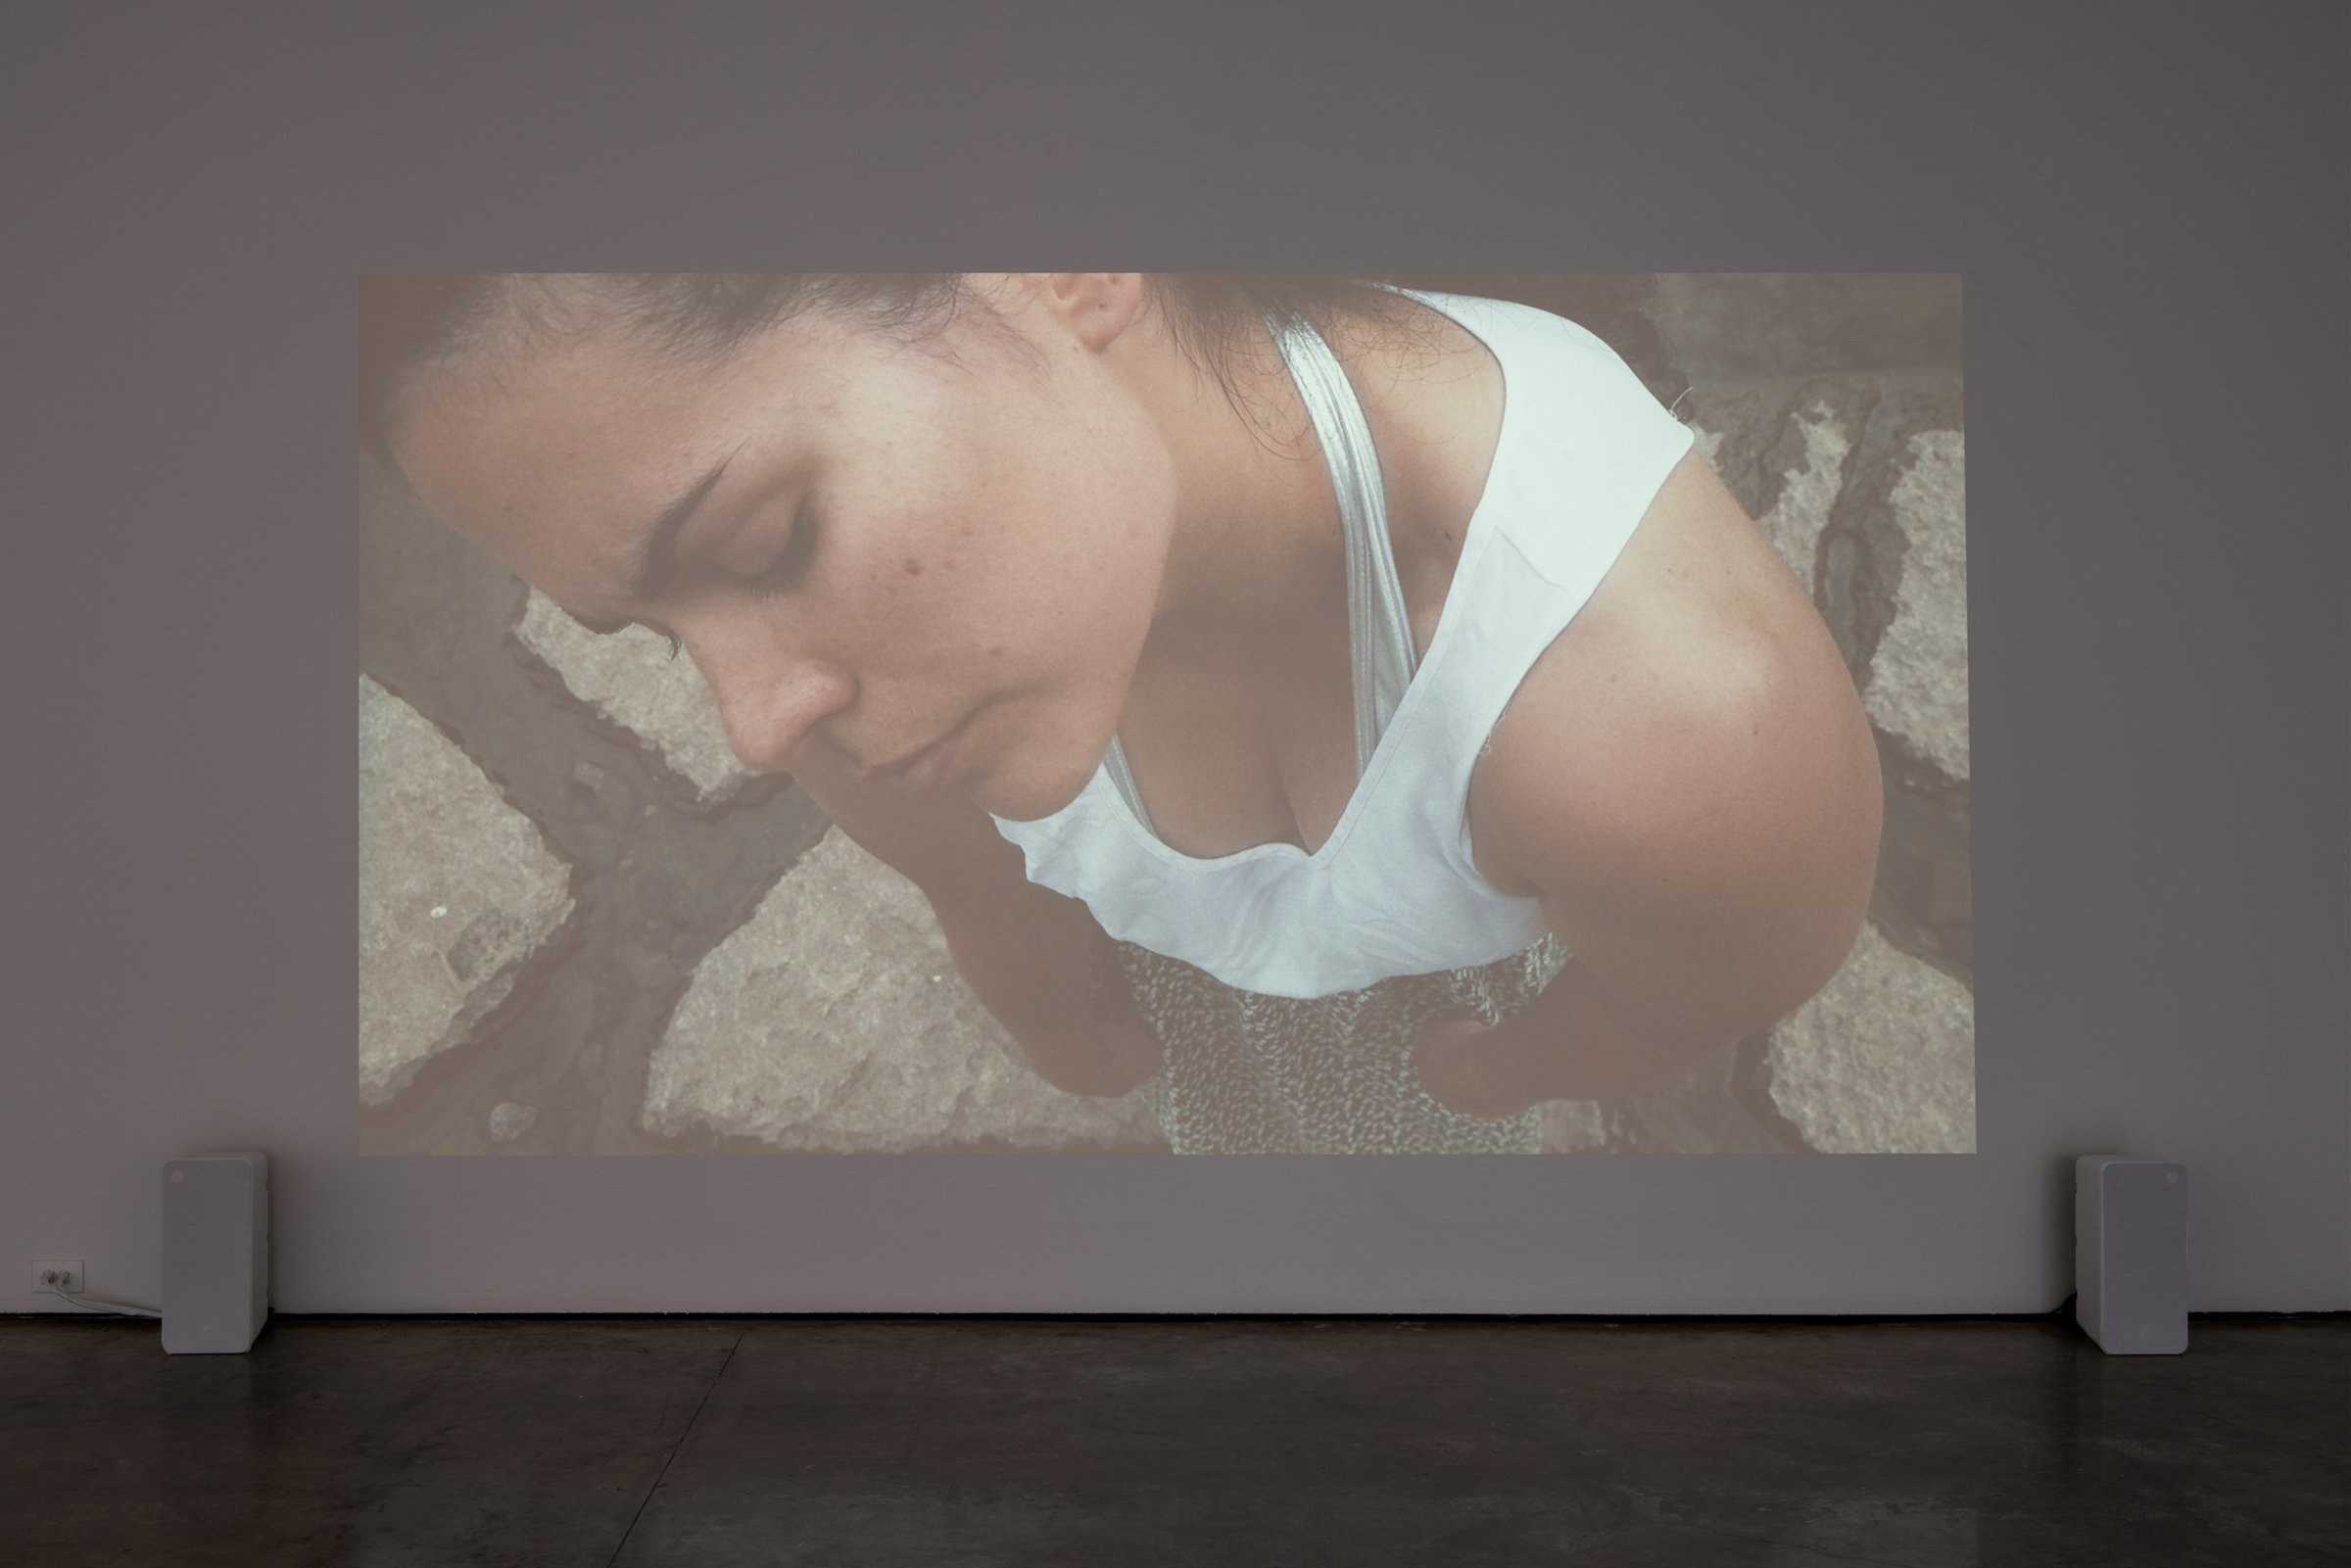  Tanya Lukin Linklater,  This moment an endurance to the end forever  (installation view), 2020, single channel projection with sound, 23m 17s. Image courtesy of Oakville Galleries. Courtesy of the artist. Photo by Blaine Campbell. 